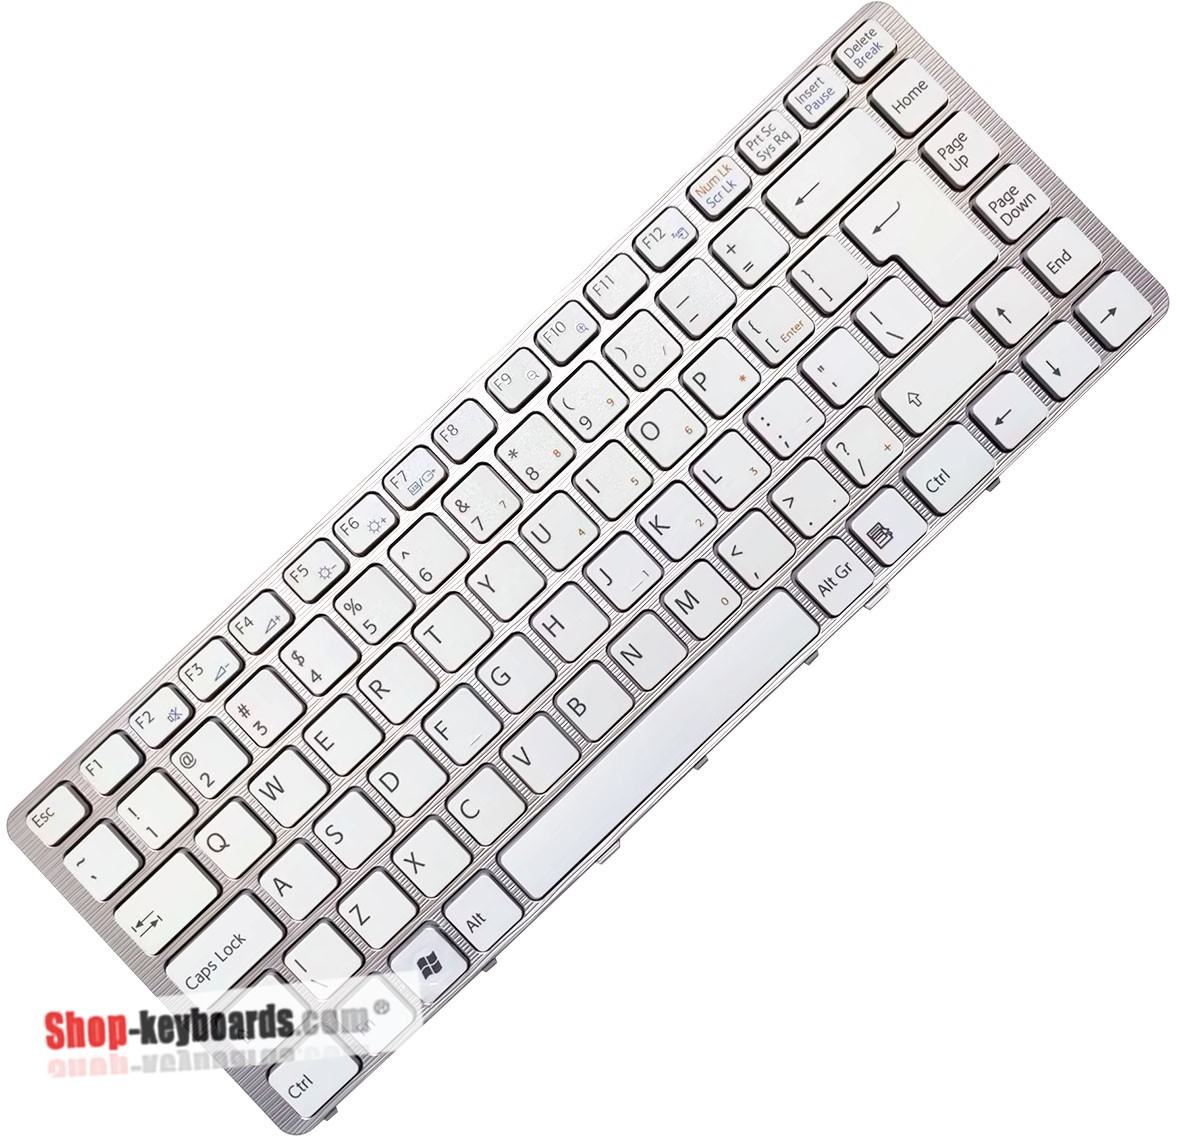 Sony Vaio VGN-NW345G Keyboard replacement